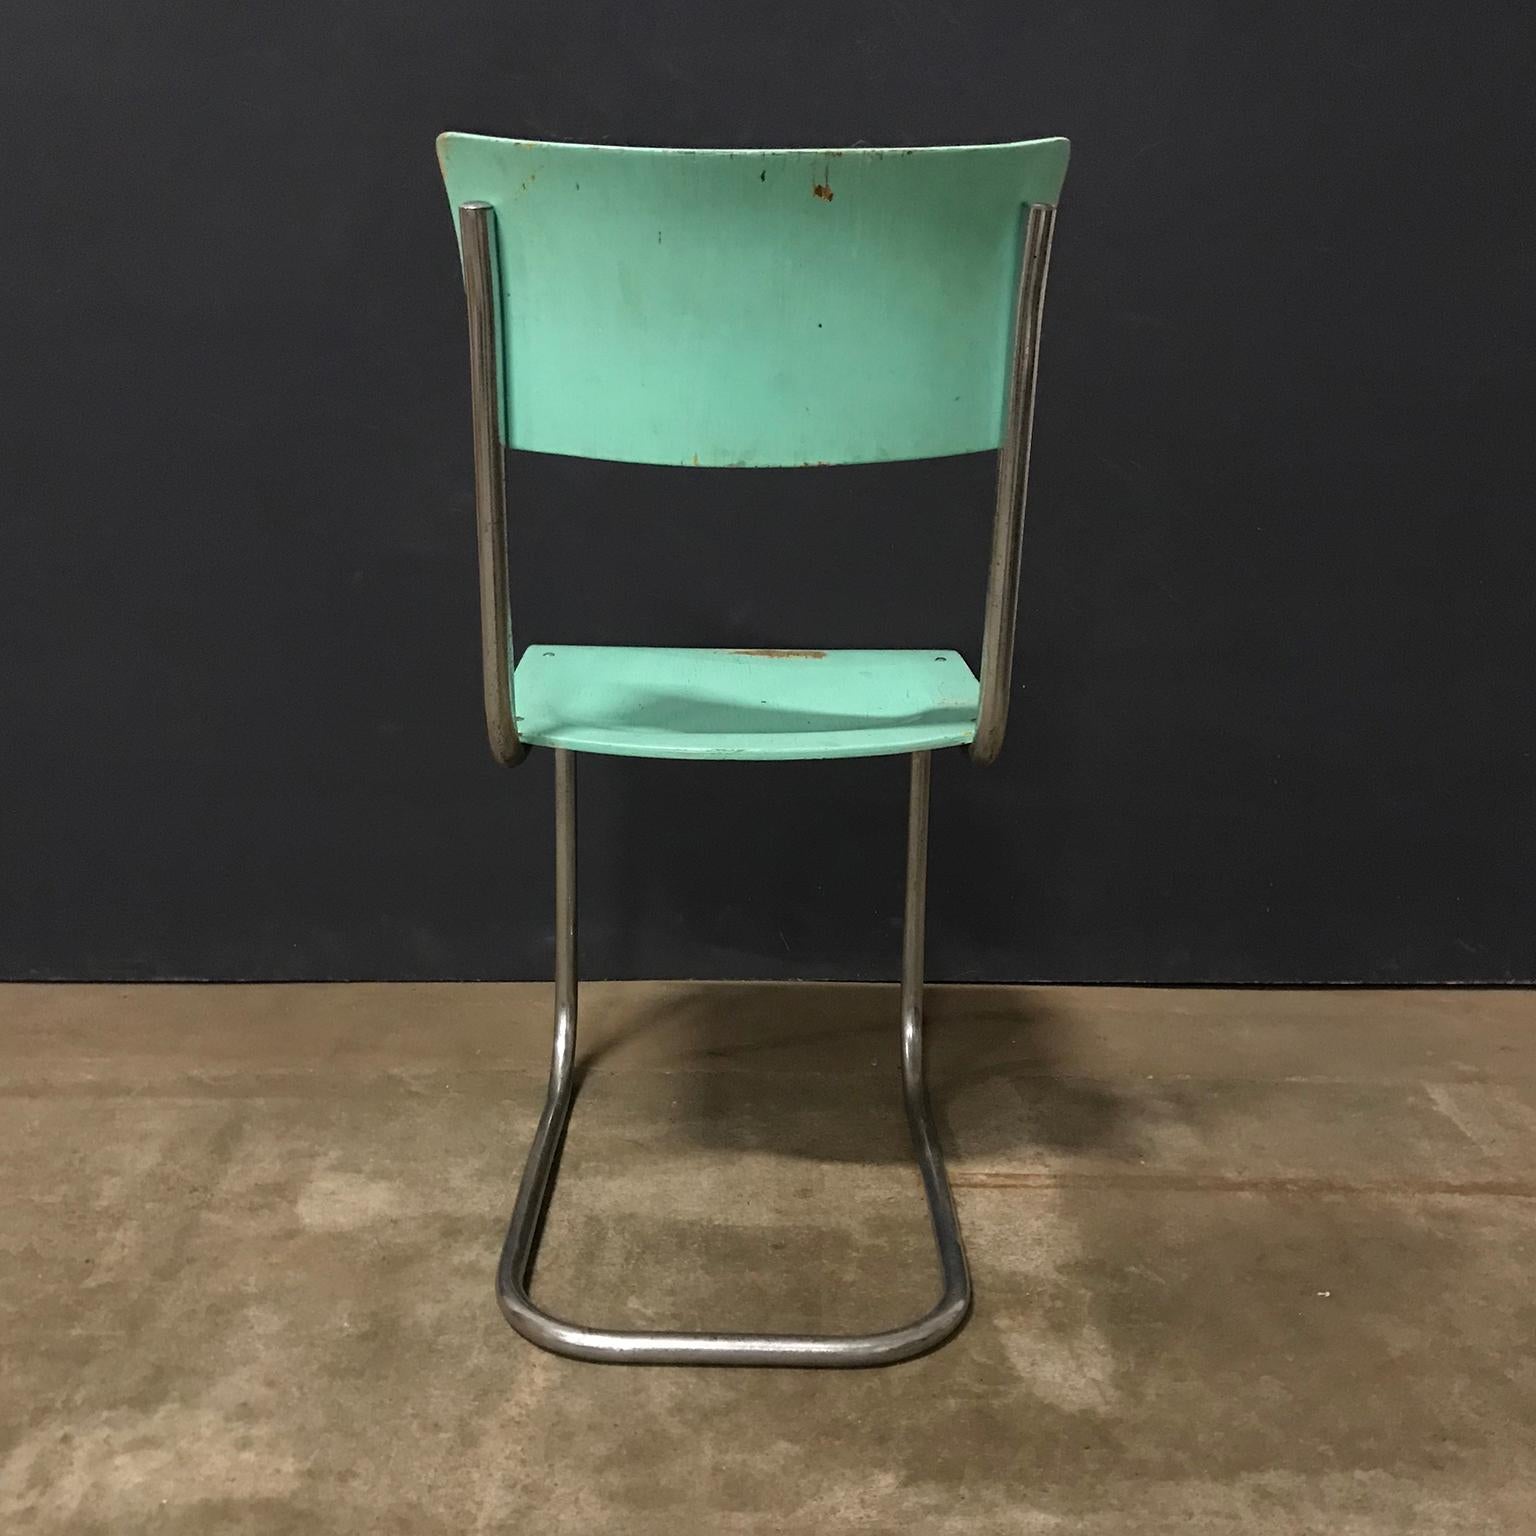 1931, Mart Stam for Thonet, Turquoise Wooden S43 In Good Condition For Sale In Amsterdam IJMuiden, NL